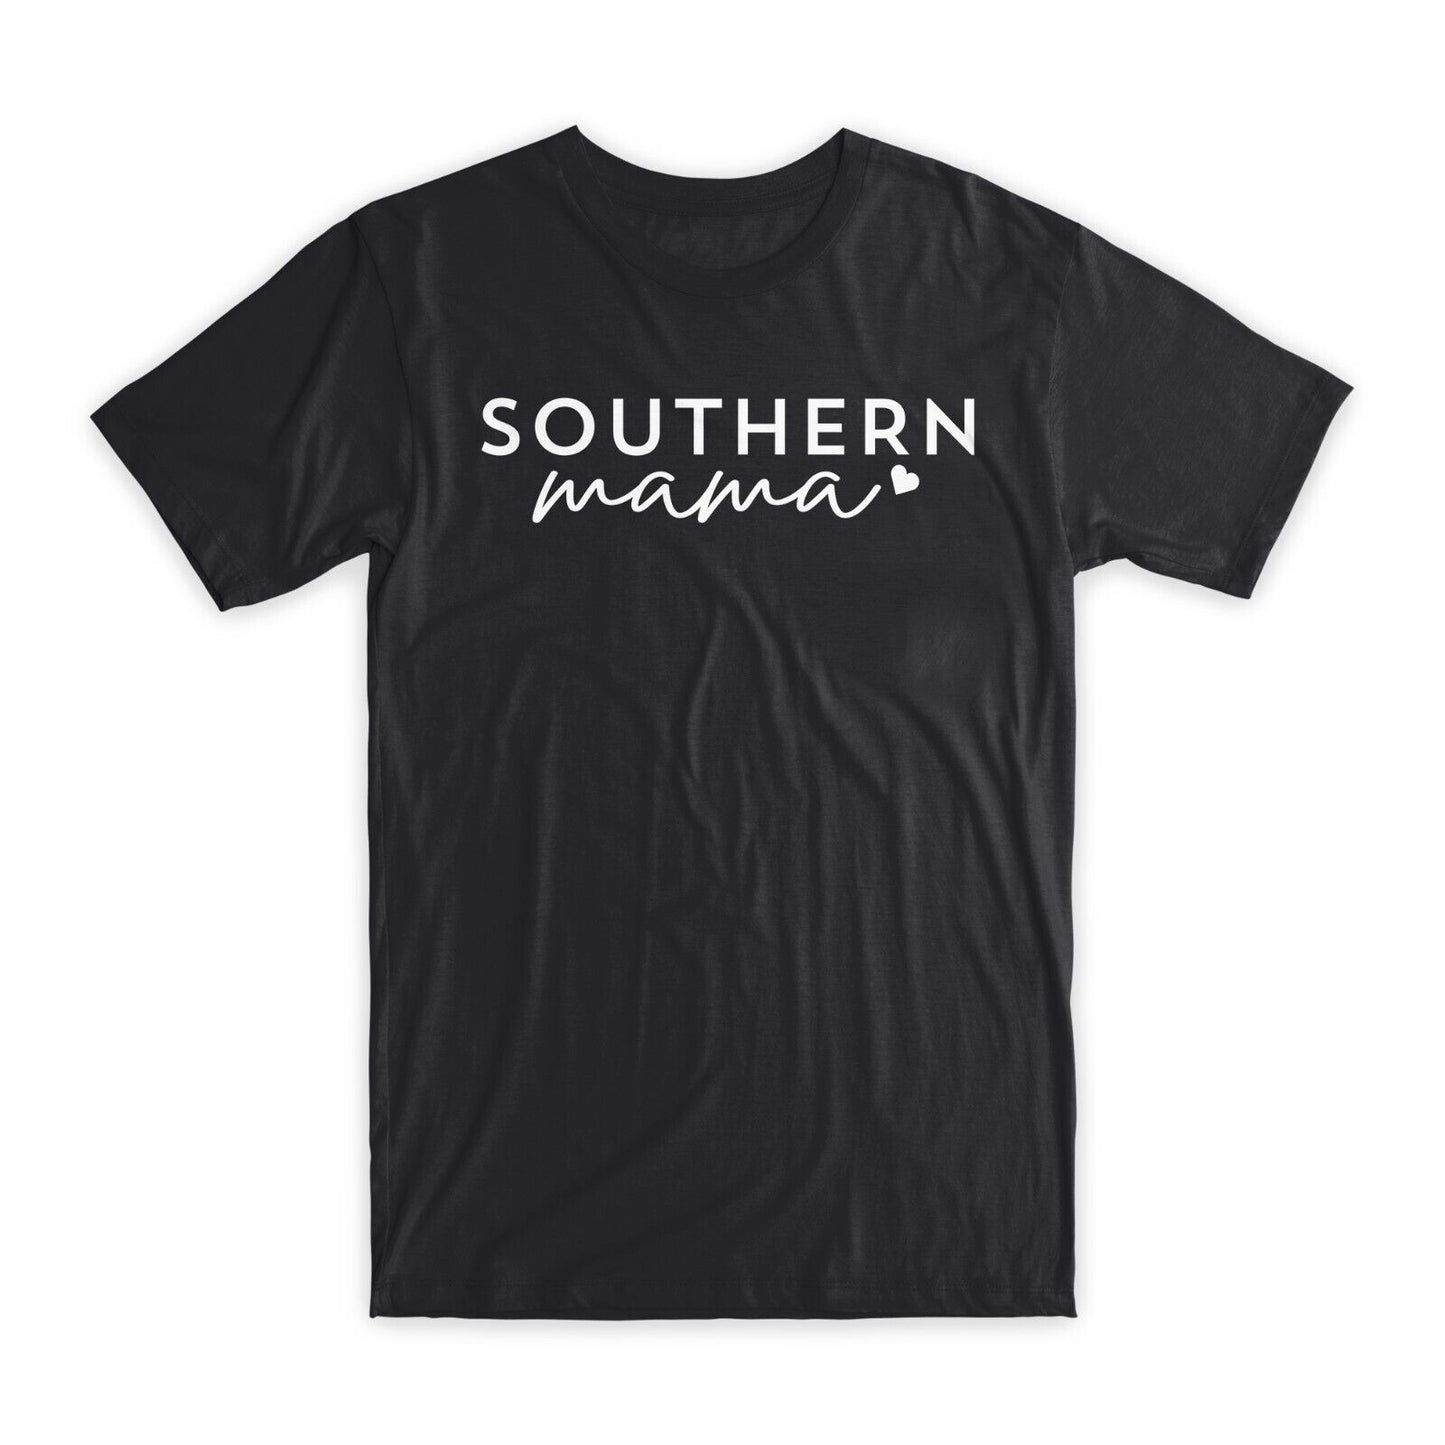 Southern Mama T-Shirt Premium Soft Cotton Crew Neck Funny Tees Novelty Gifts NEW